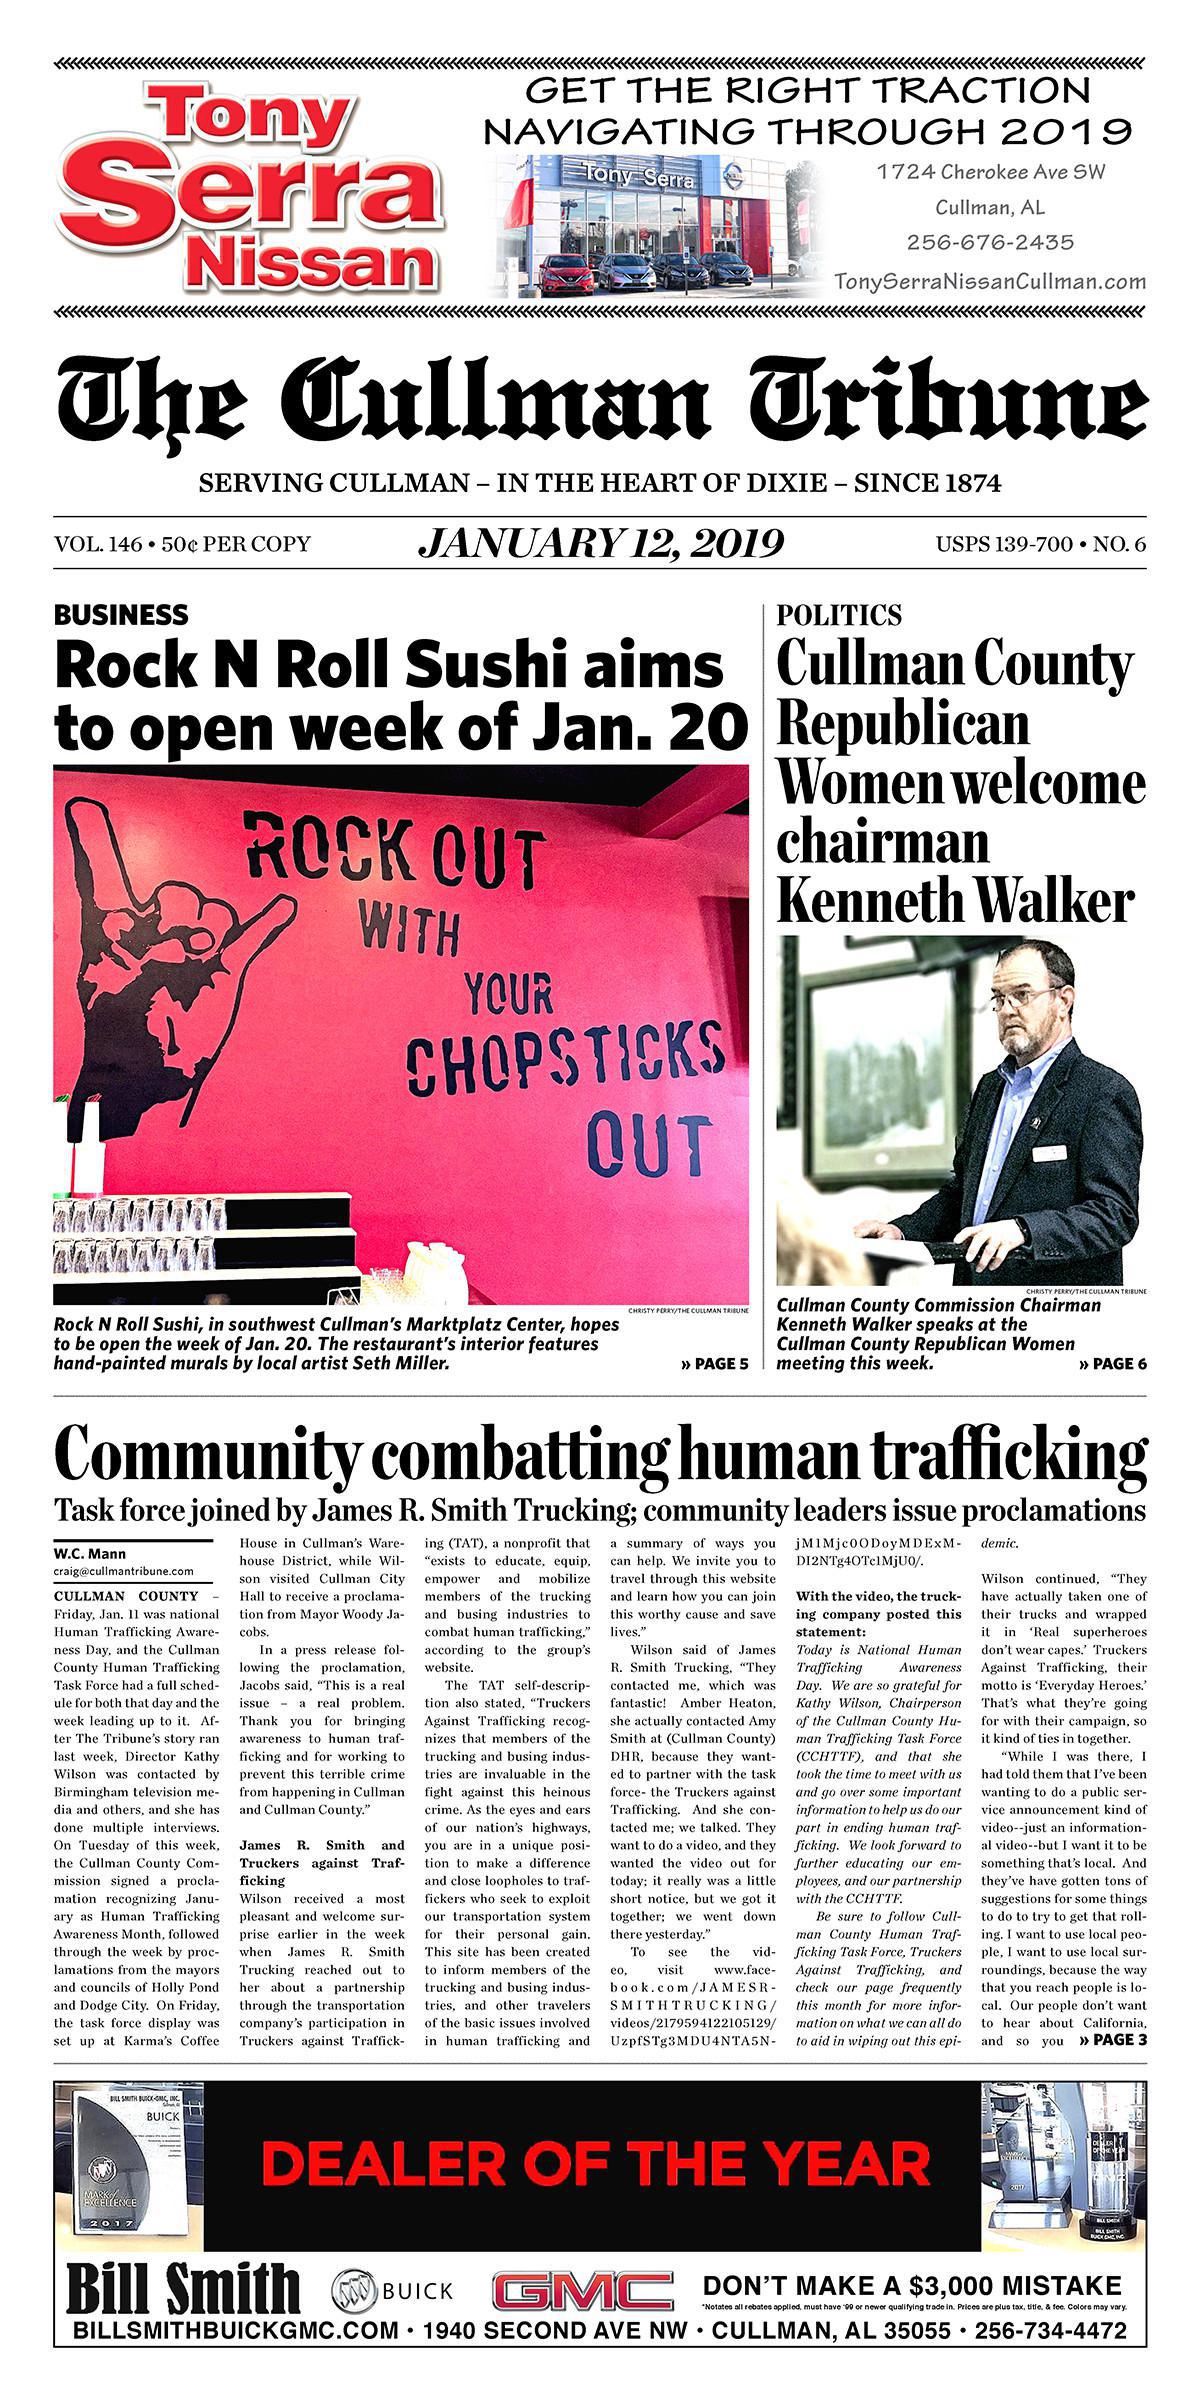 Good Morning Cullman! The 01-12-2019 edition of the Cullman Tribune is now ready to view